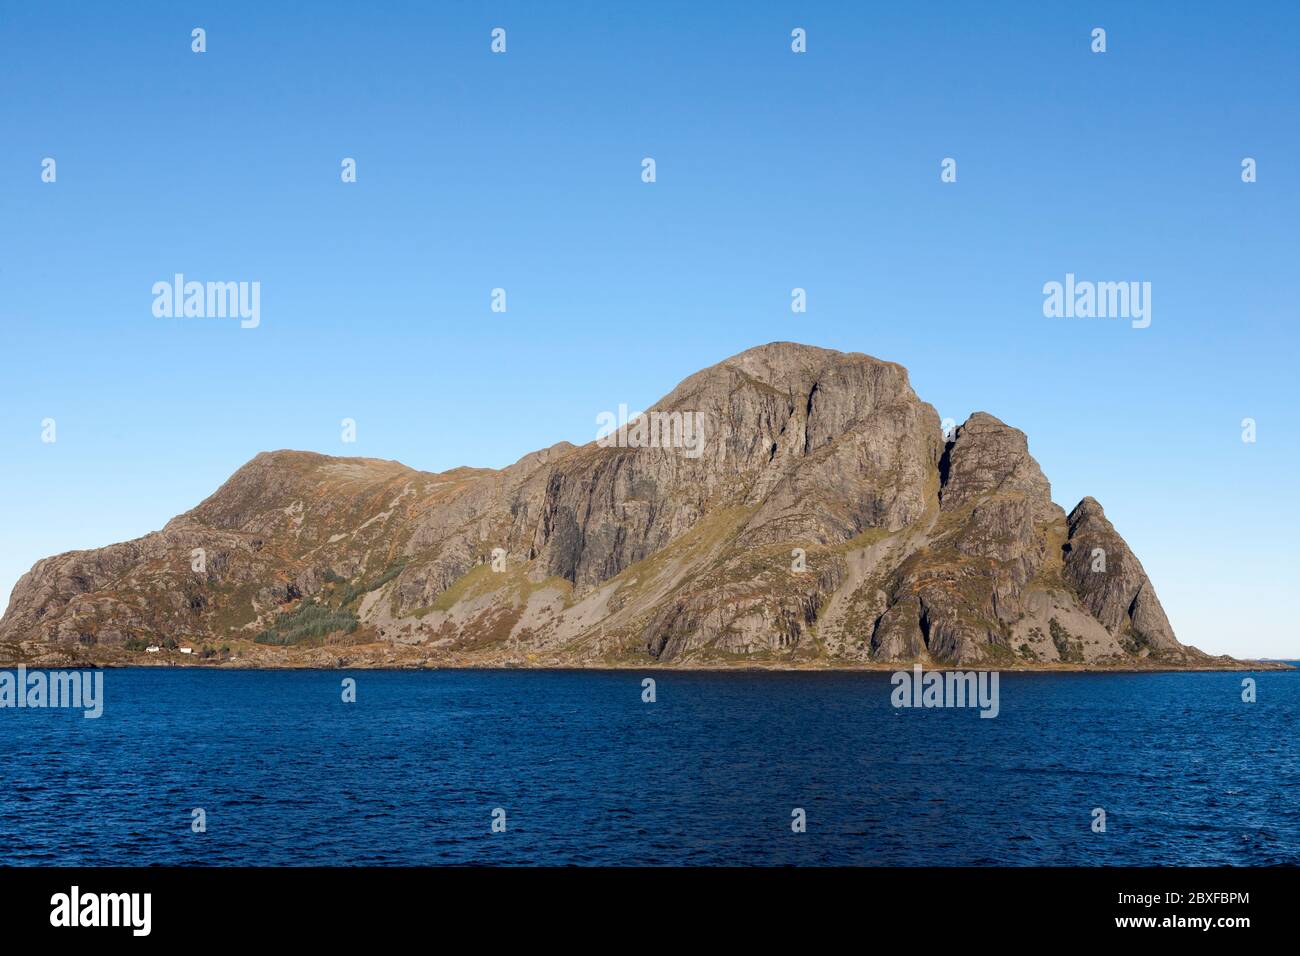 The famous mountain of Norskehesten dominates the island of Alden, Askvoll, Sogn og Fjordane, Norway Stock Photo